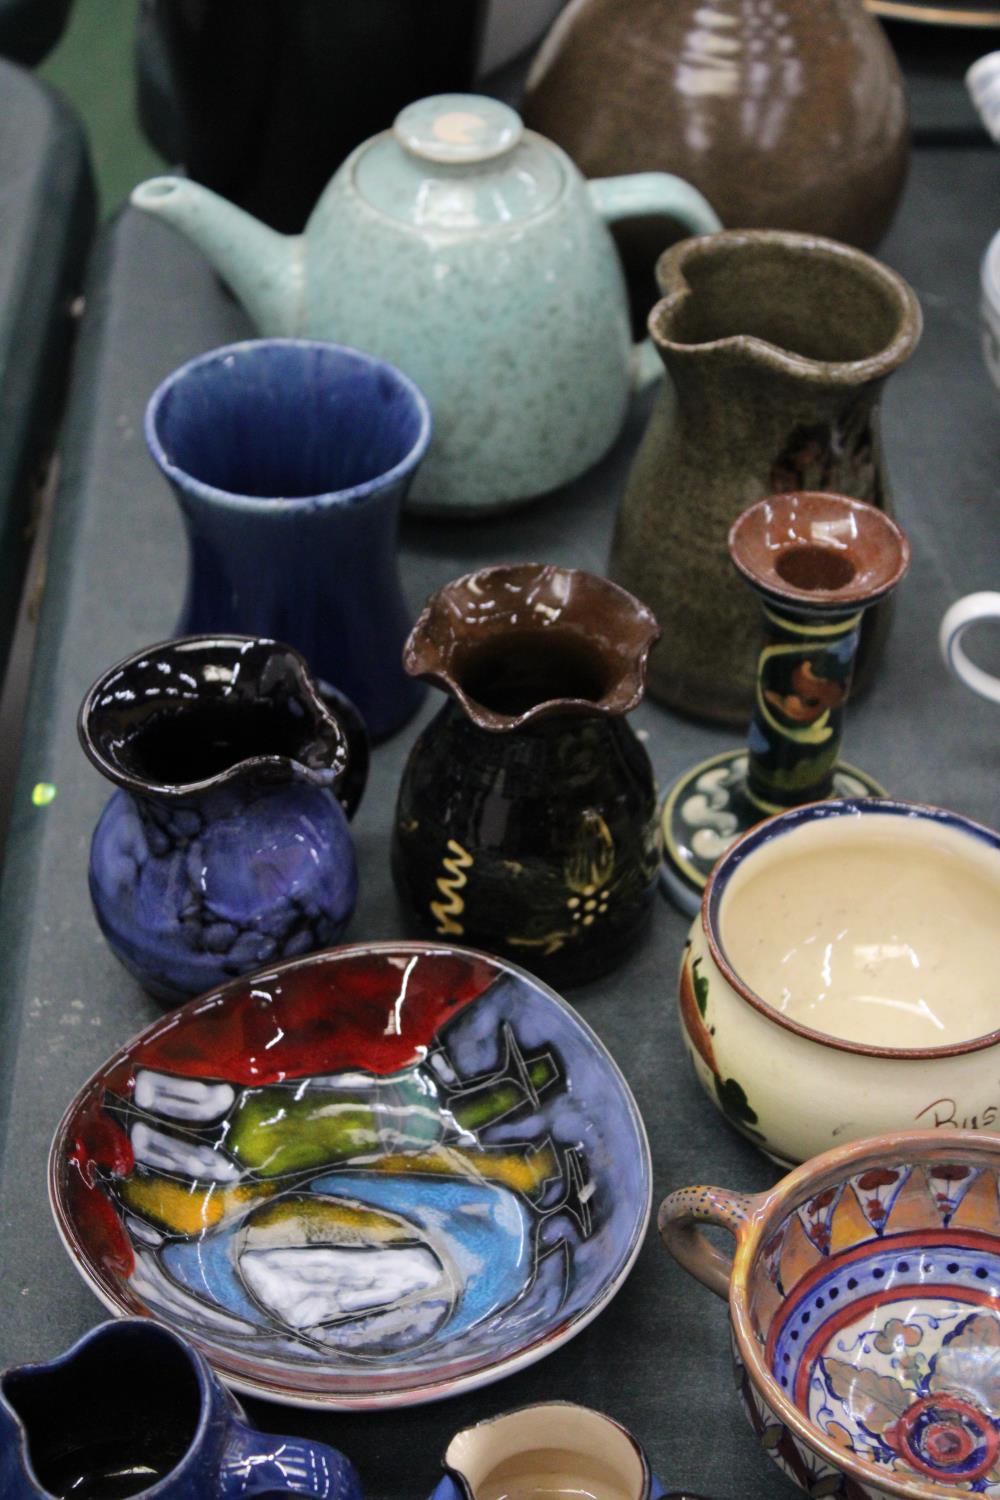 A QUANTITY OF STUDIO POTTERY TO INCLUDE A TEAPOT, CANDLE HOLDER, BOWLS ETC - SOME WITH MARKS TO - Image 3 of 6